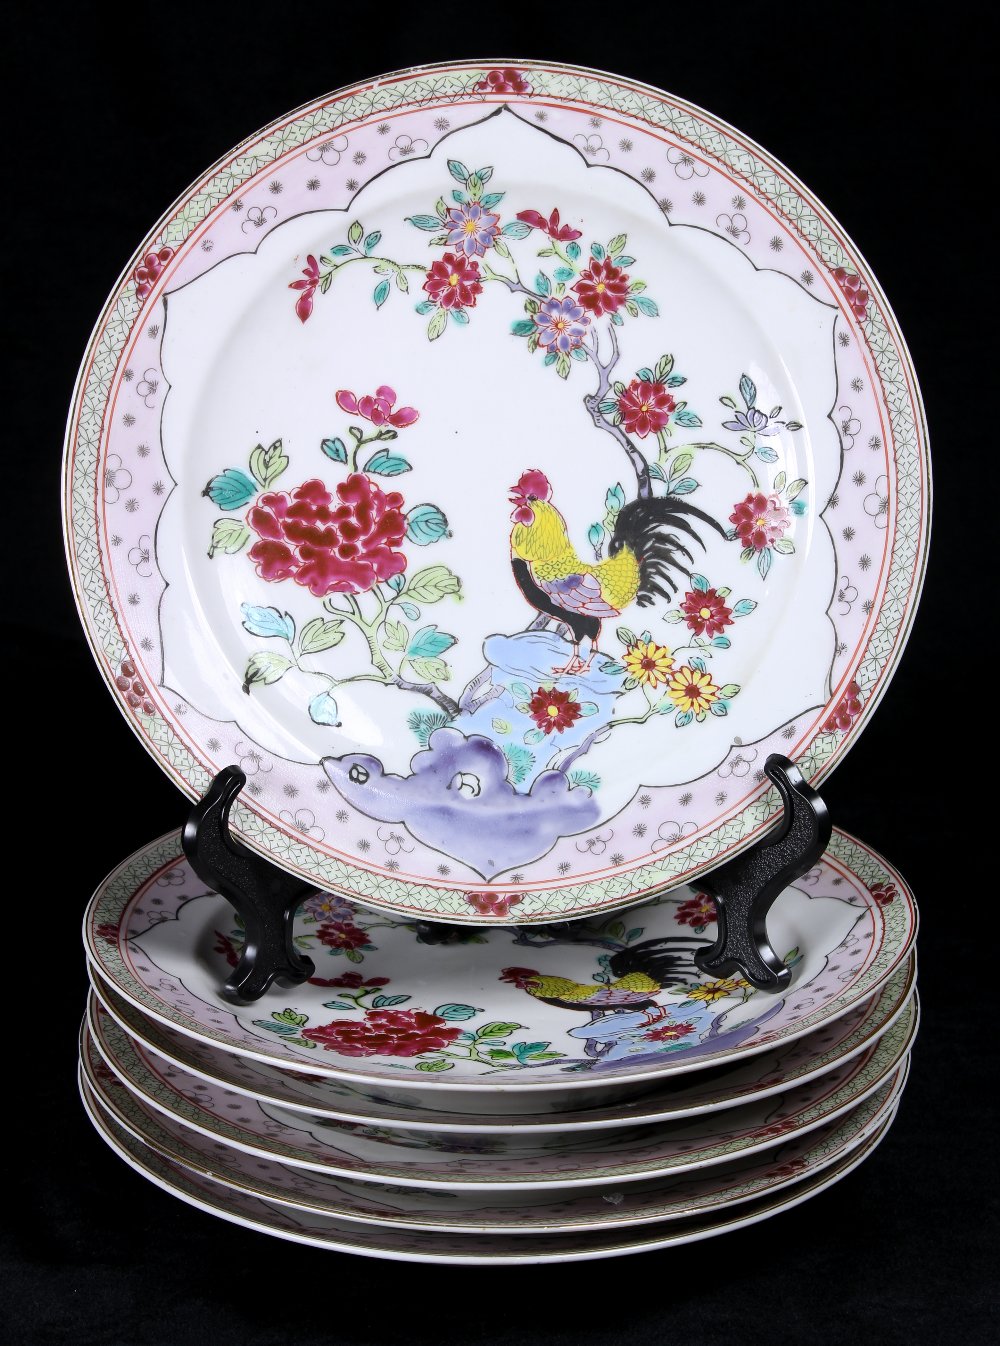 (lot of 6) Chinese enameled porcelain plates, decorated with a rooster amid peonies and various